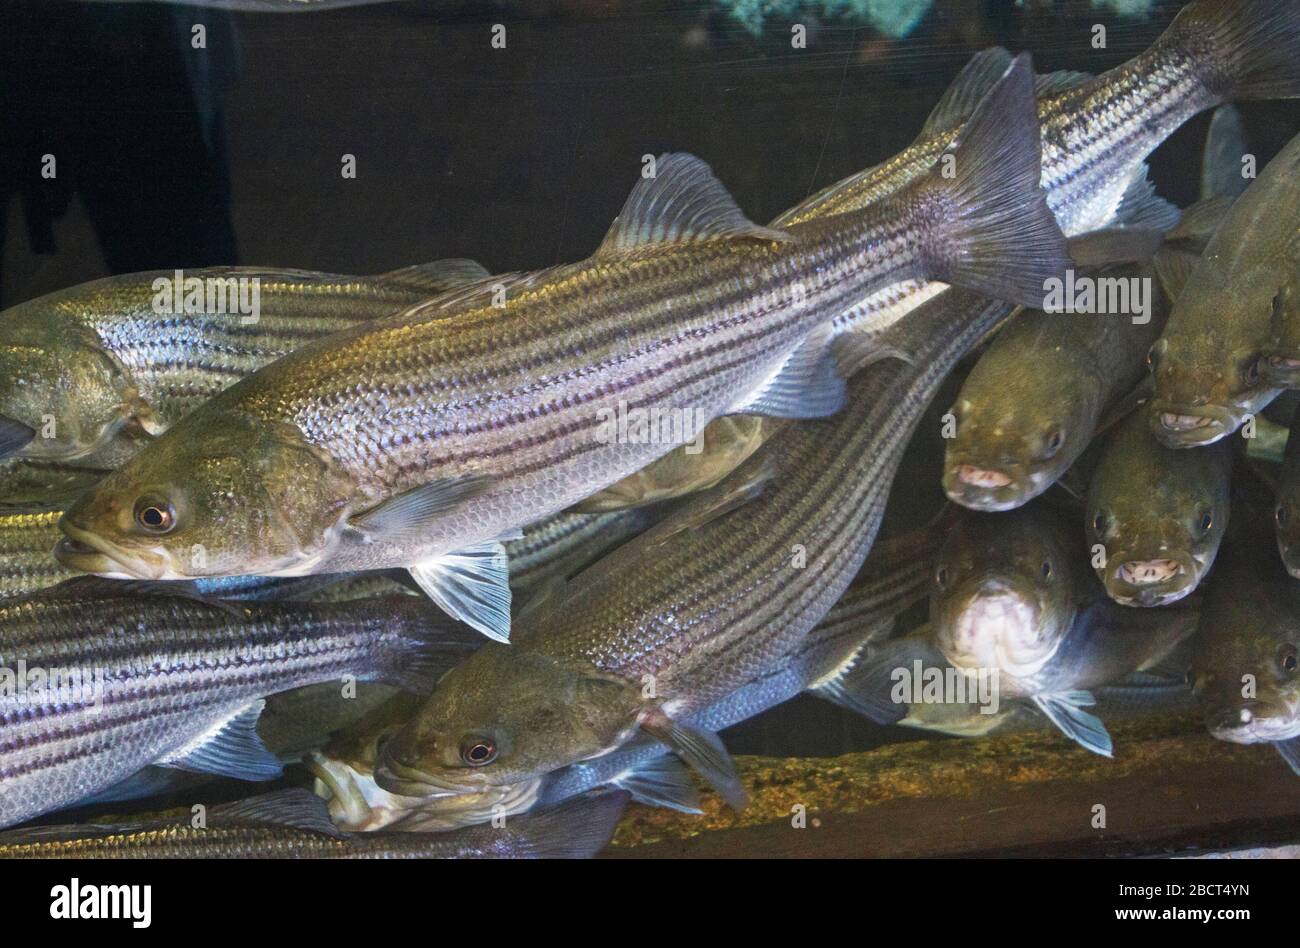 A crowded, underwater school of curious striped bass with shiny scales swim  by Stock Photo - Alamy